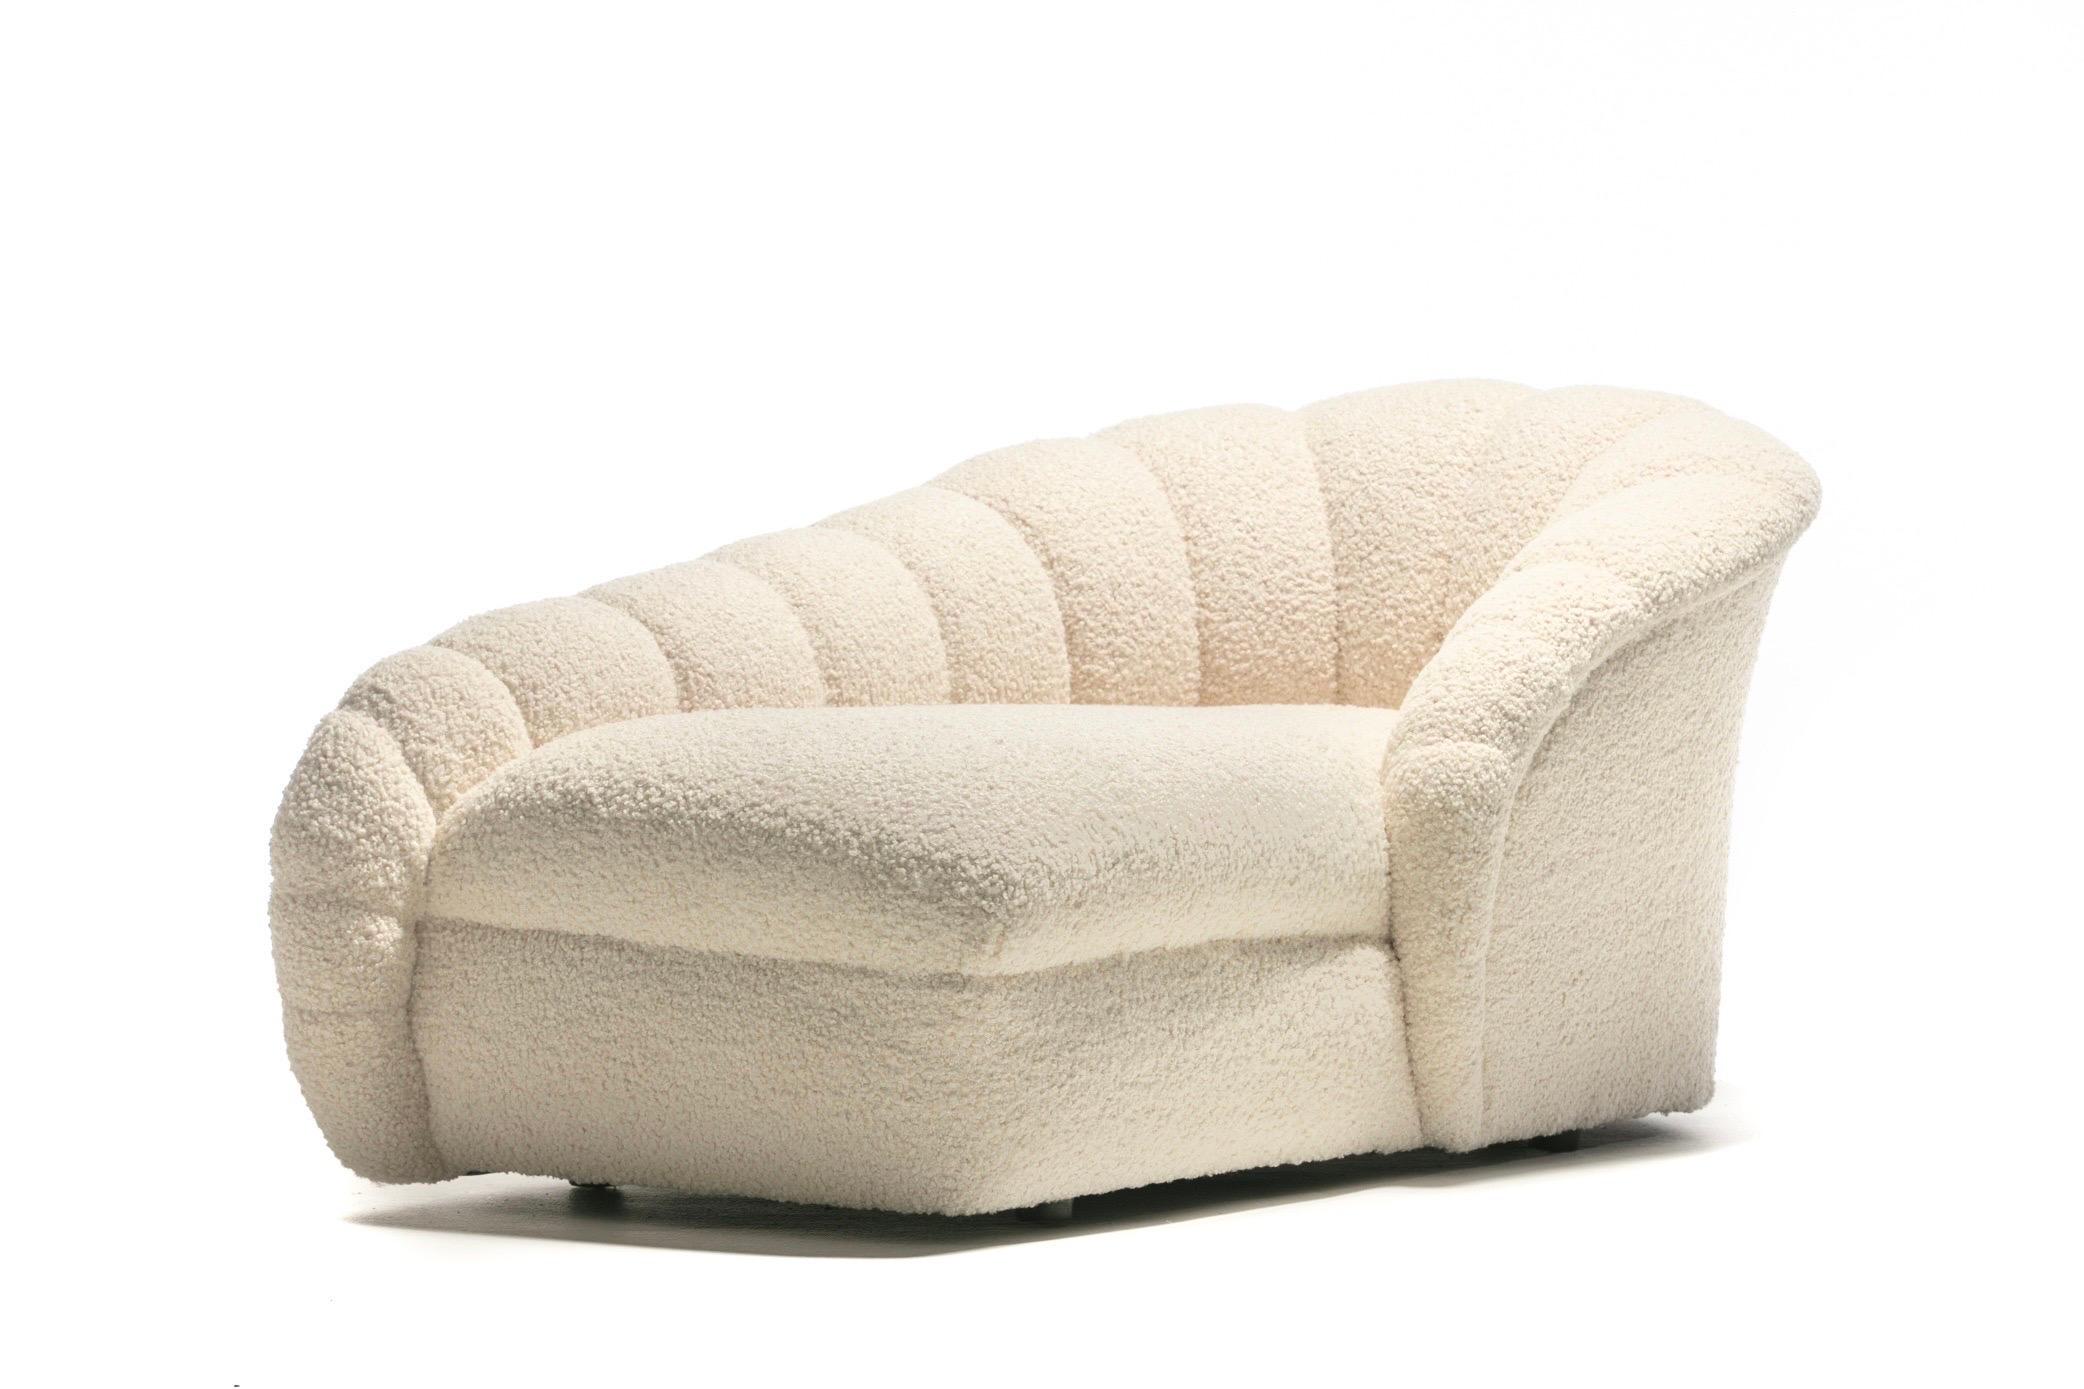 Post-Modern Vladimir Kagan Post Modern Clam Chaise Lounge in Soft Ivory White Bouclé 1980s For Sale